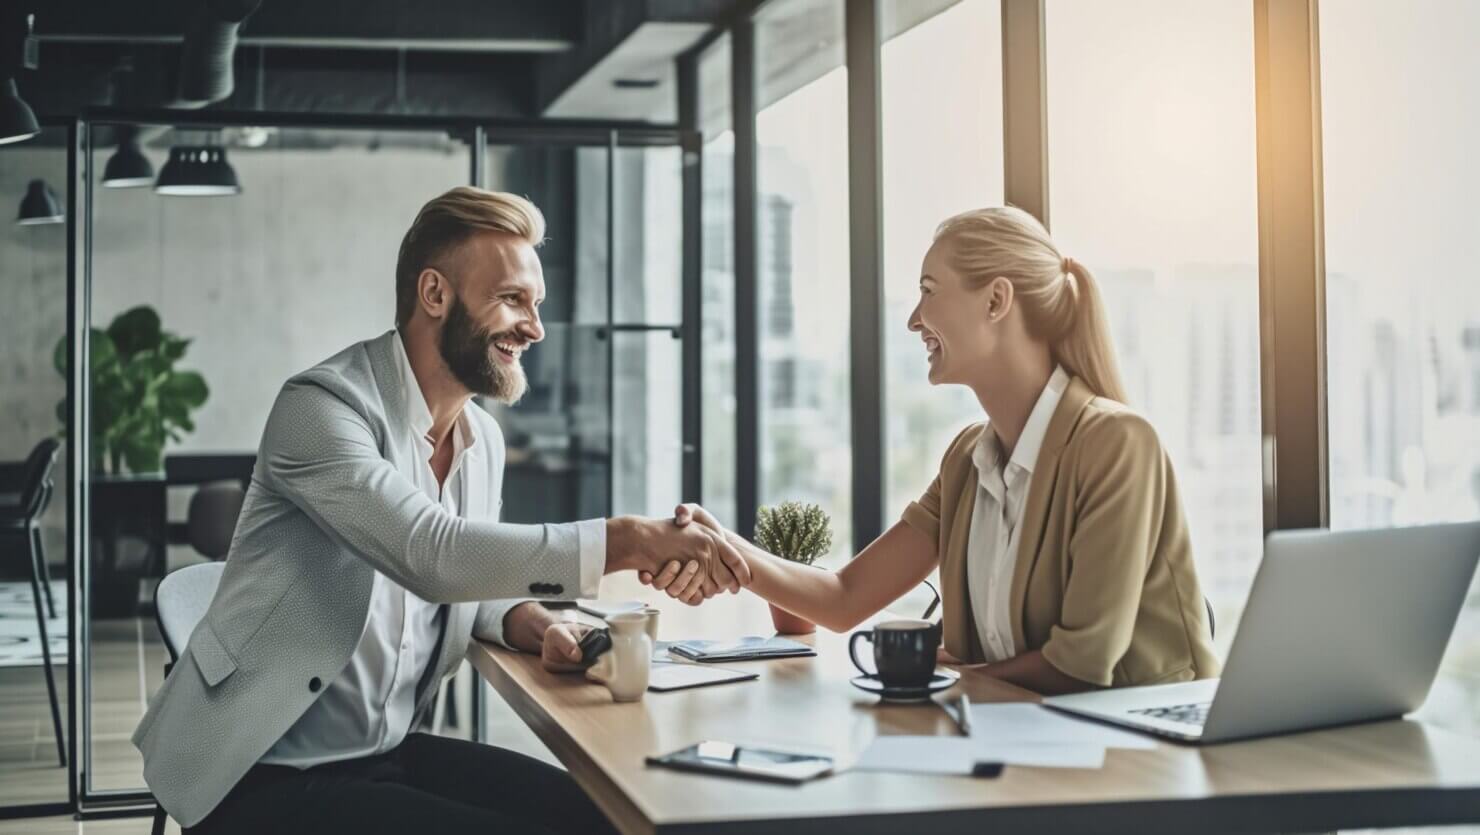 Hiring process in office. Two people shaking hands at the end of an interview